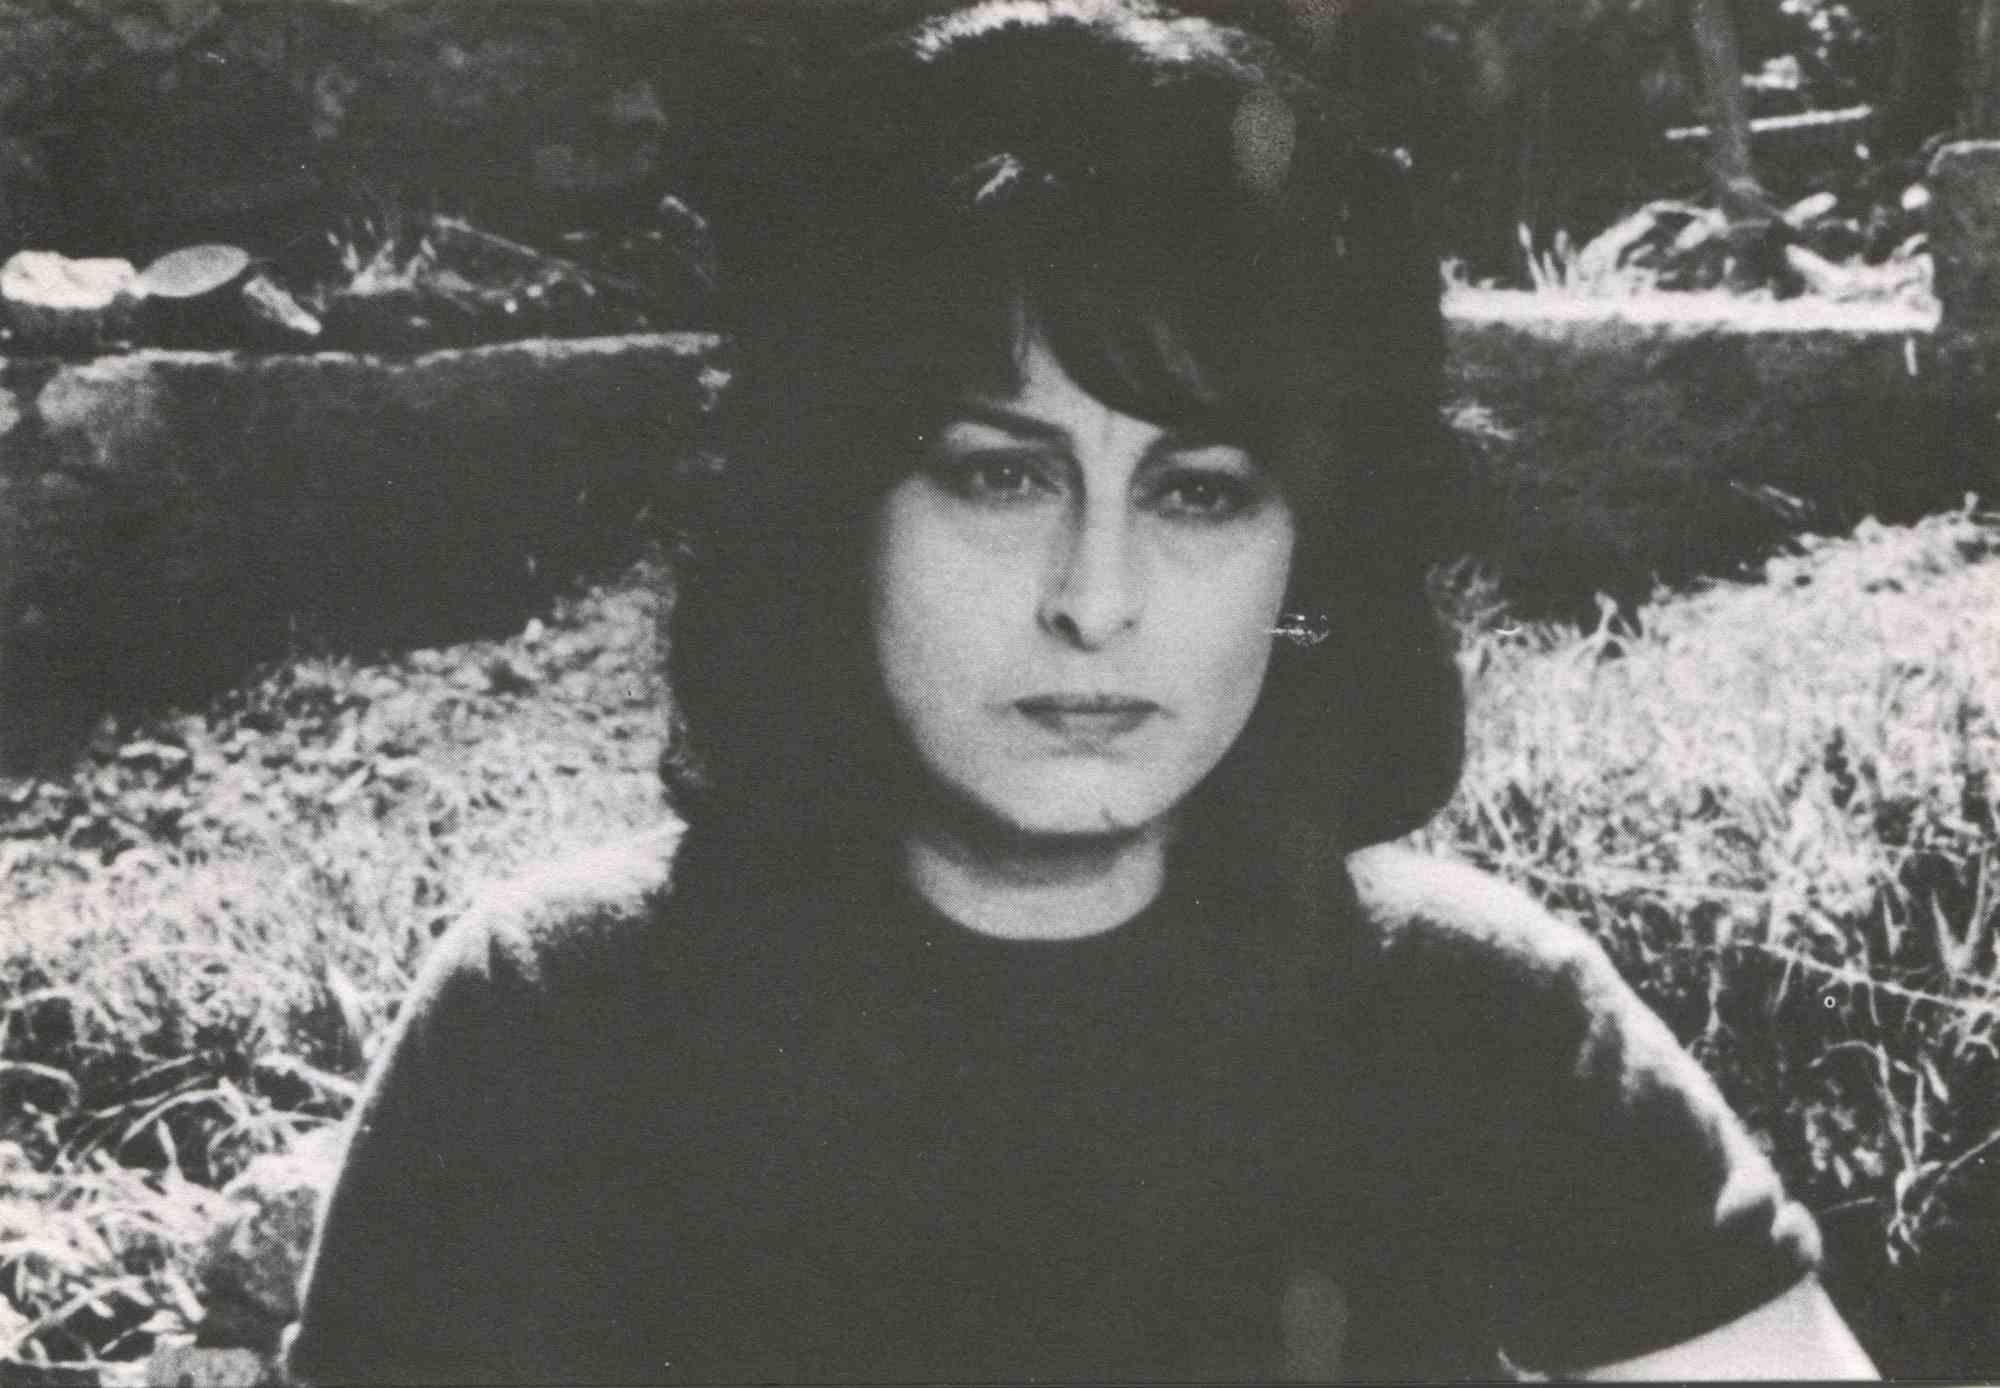 Unknown Black and White Photograph - Vintage Portrait of Anna Magnani - 1960s